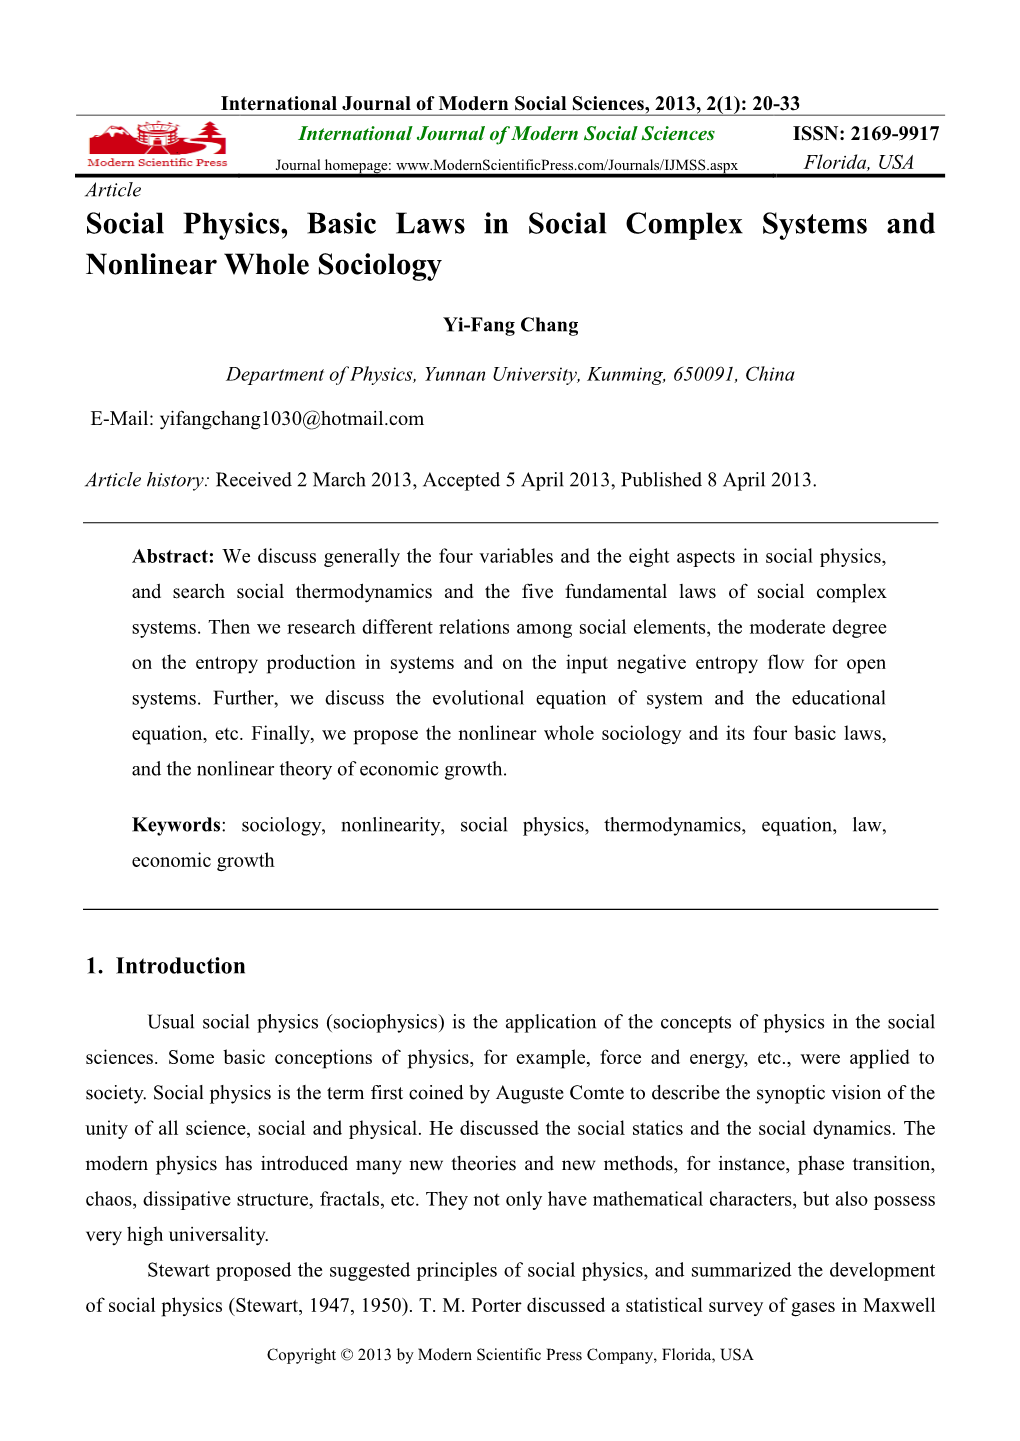 Social Physics, Basic Laws in Social Complex Systems and Nonlinear Whole Sociology